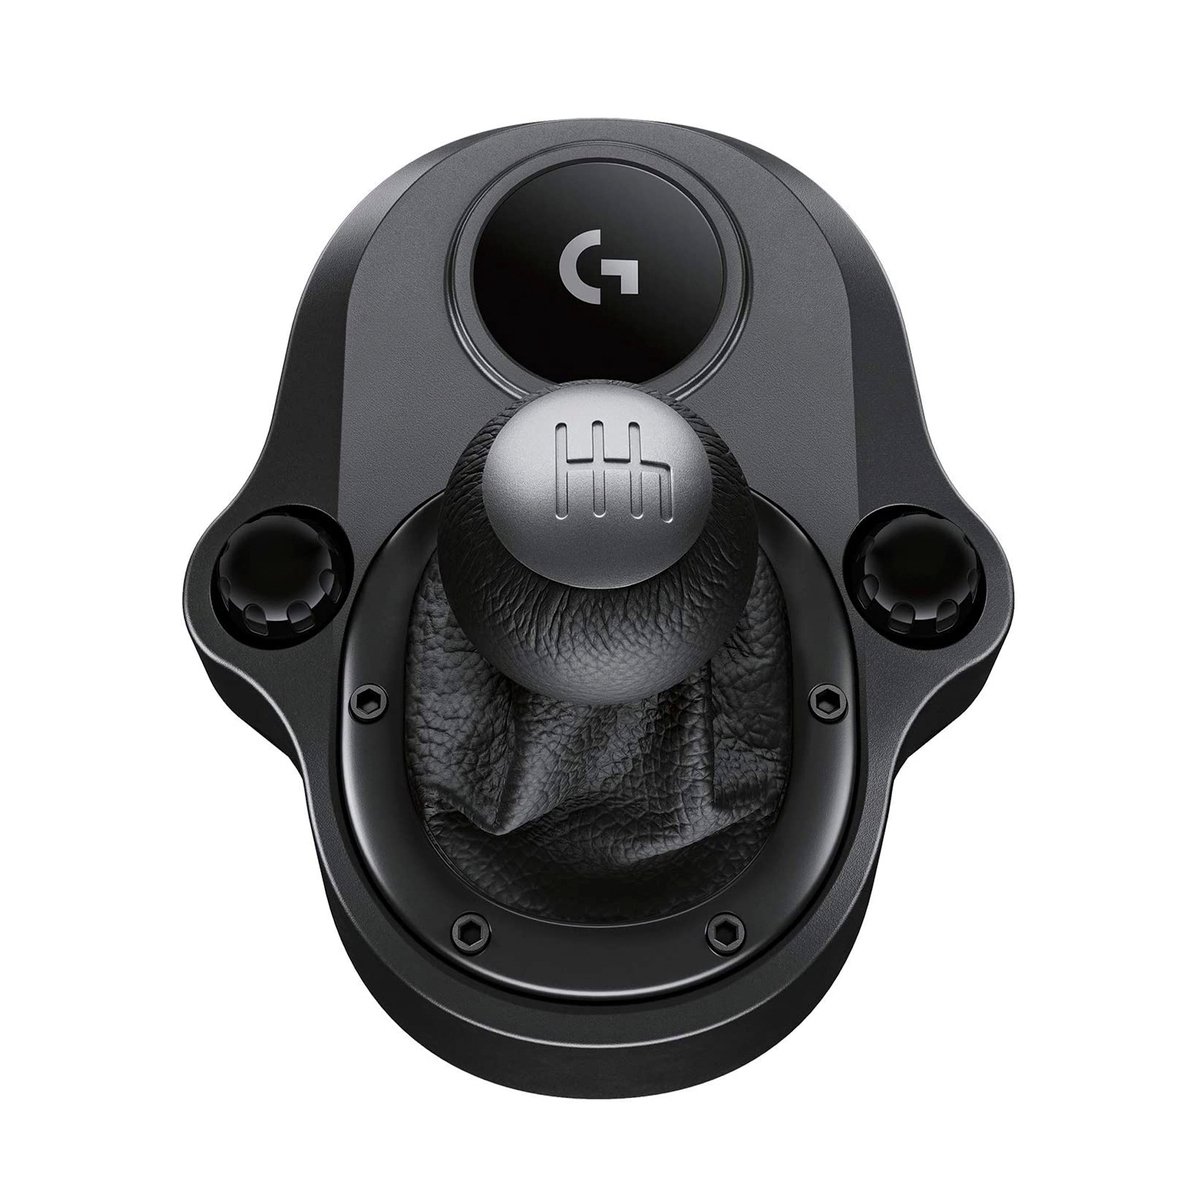 Logitech Driving Force Racing Shifter for G29 and G920 Driving Force Racing Wheels,Black